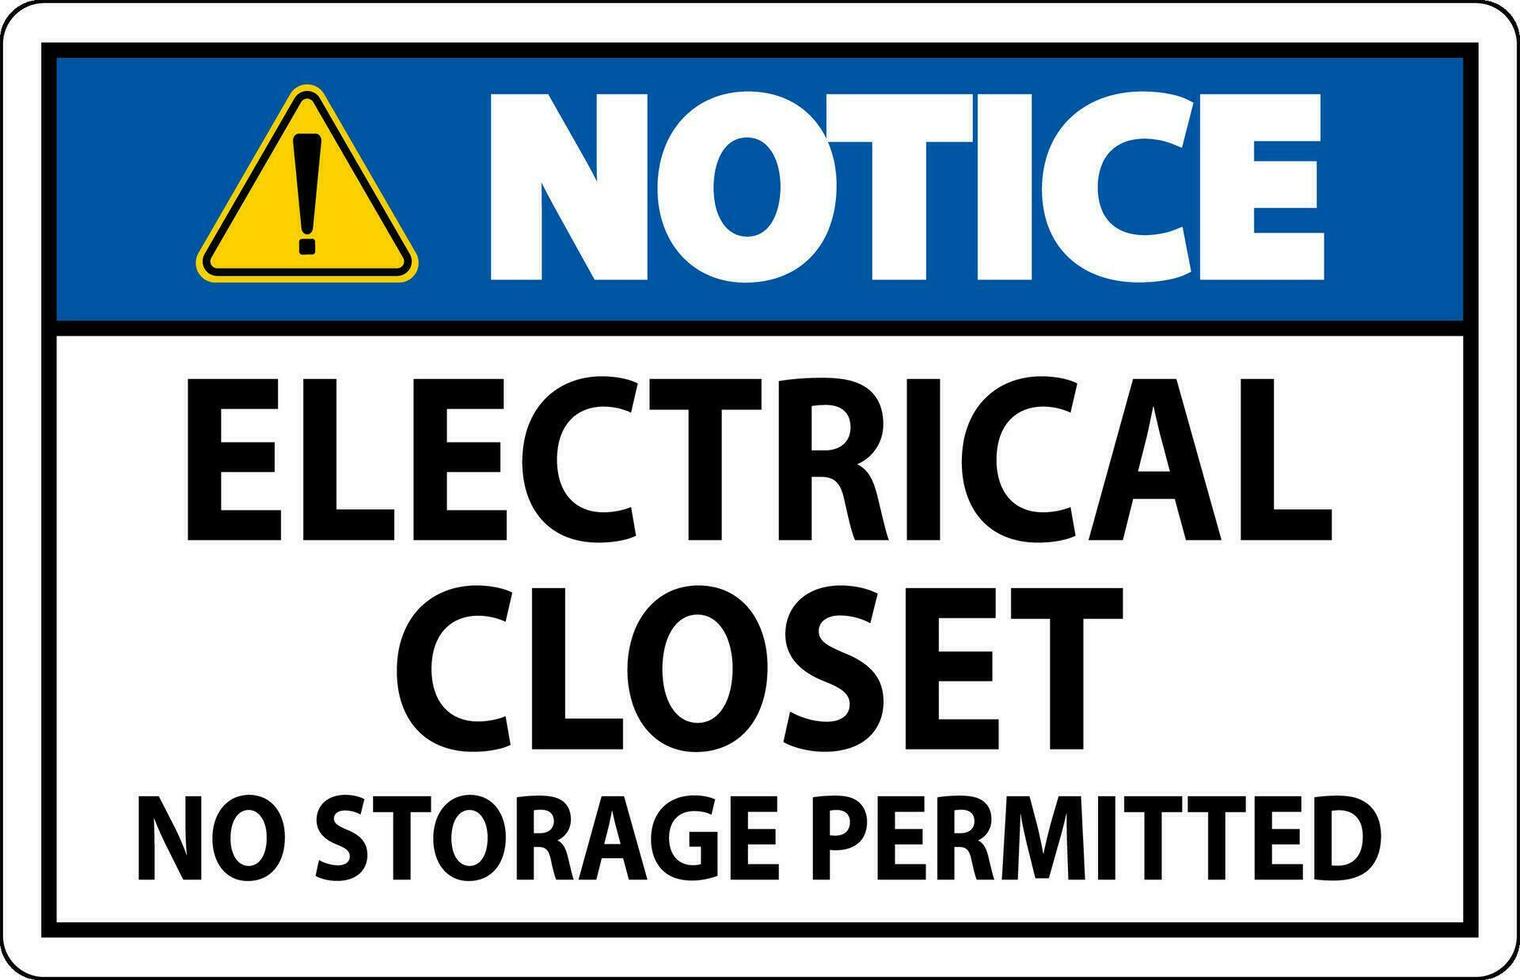 Notice Sign Electrical Closet - No Storage Permitted vector